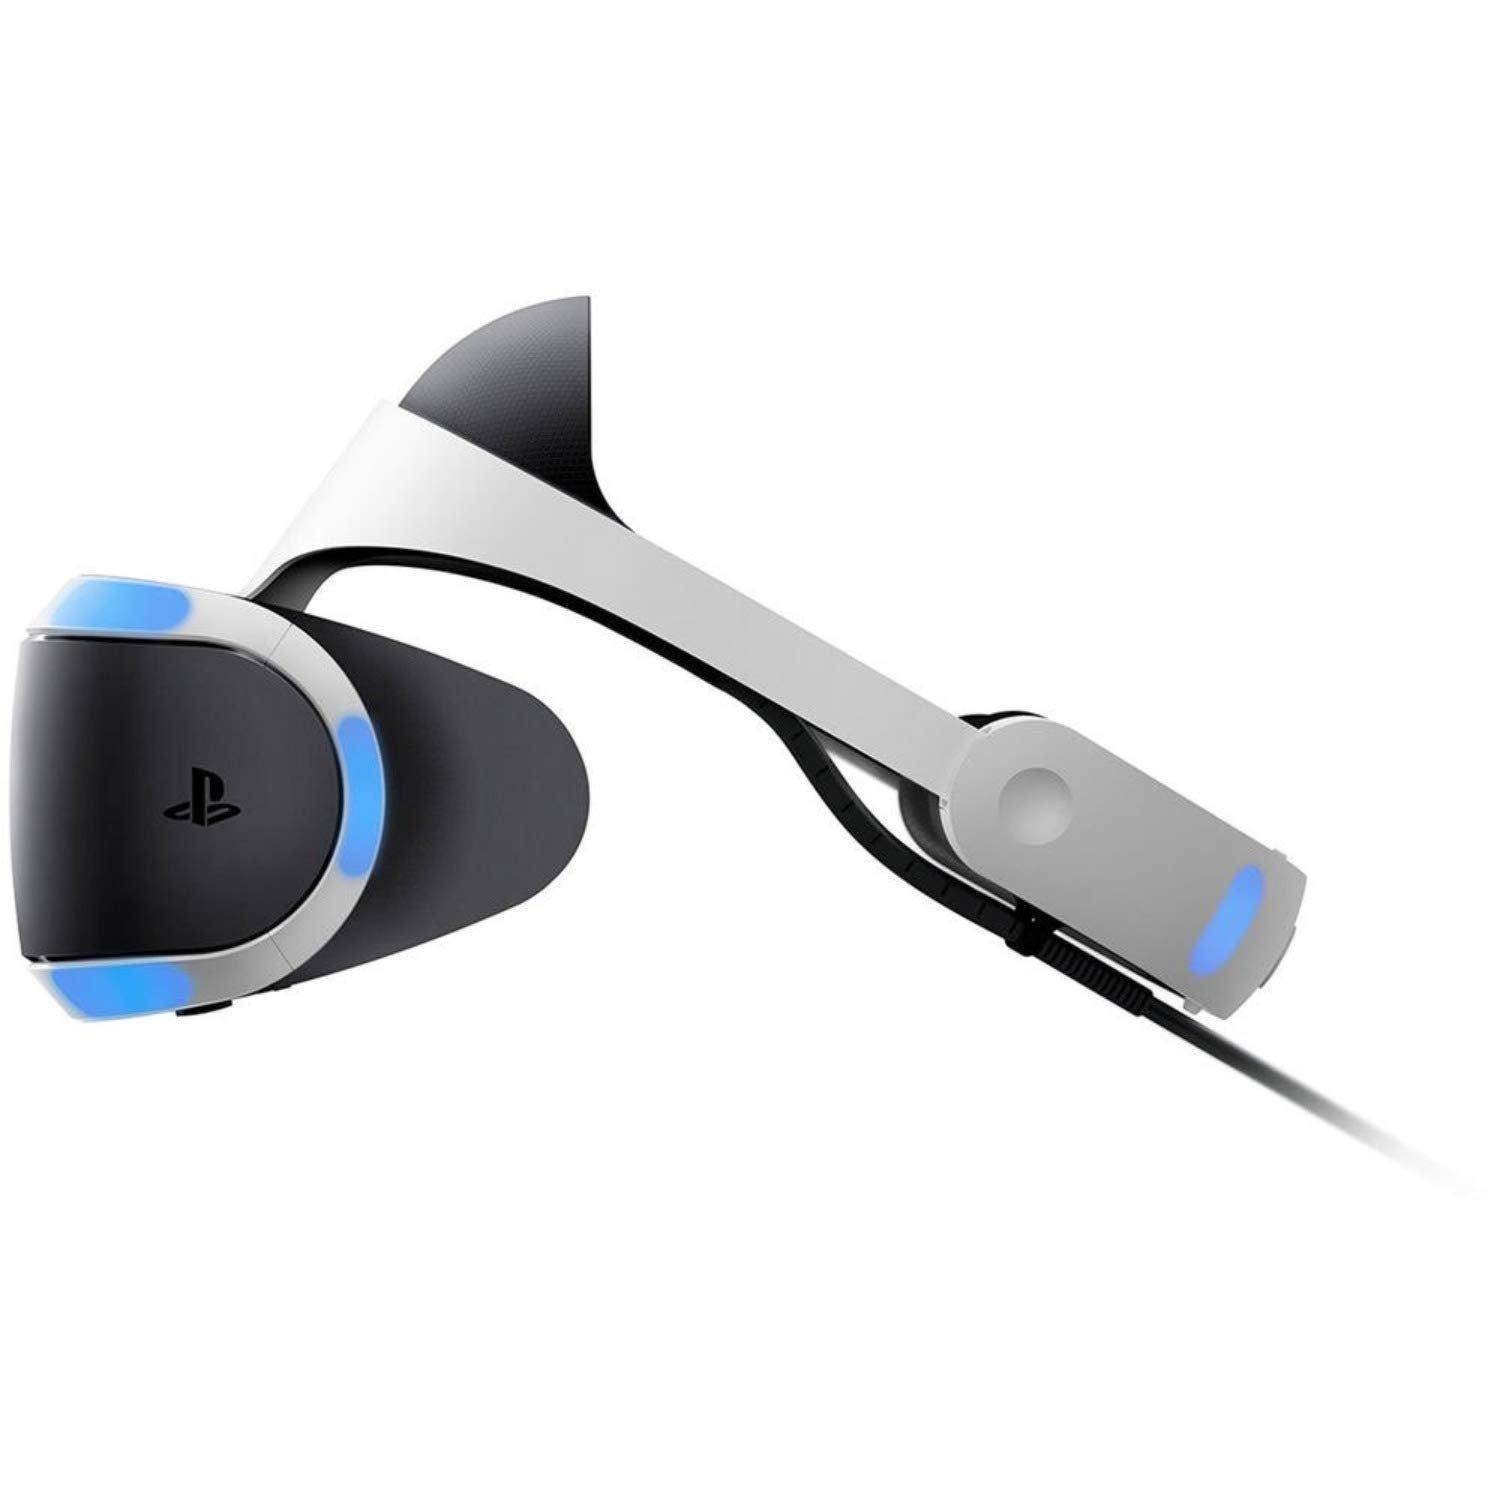 Sony PlayStation VR Headset for PS4 GameStop Premium